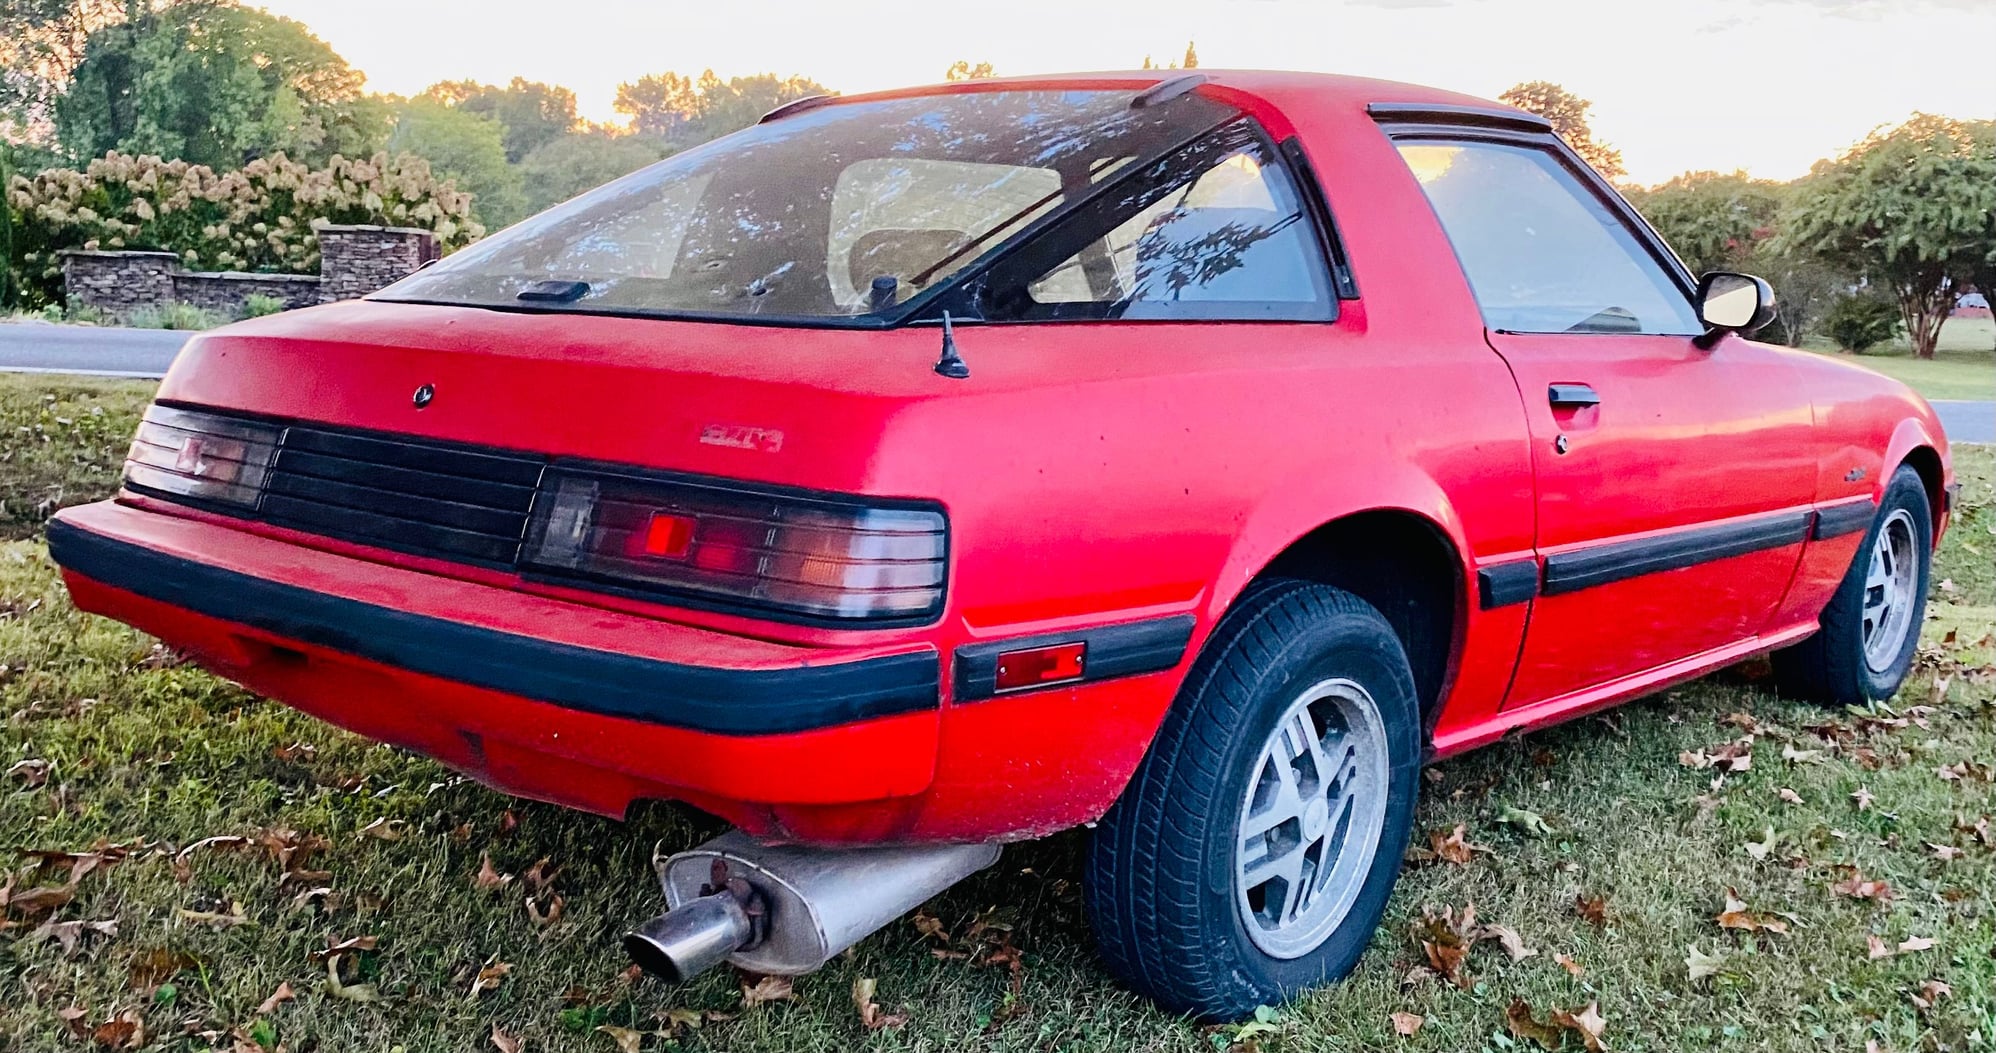 1985 Mazda RX-7 - 1985 rx-7 gs - Used - VIN JM1FB331XF0886122 - 211,978 Miles - Manual - Coupe - Red - Athens, AL 35614, United States